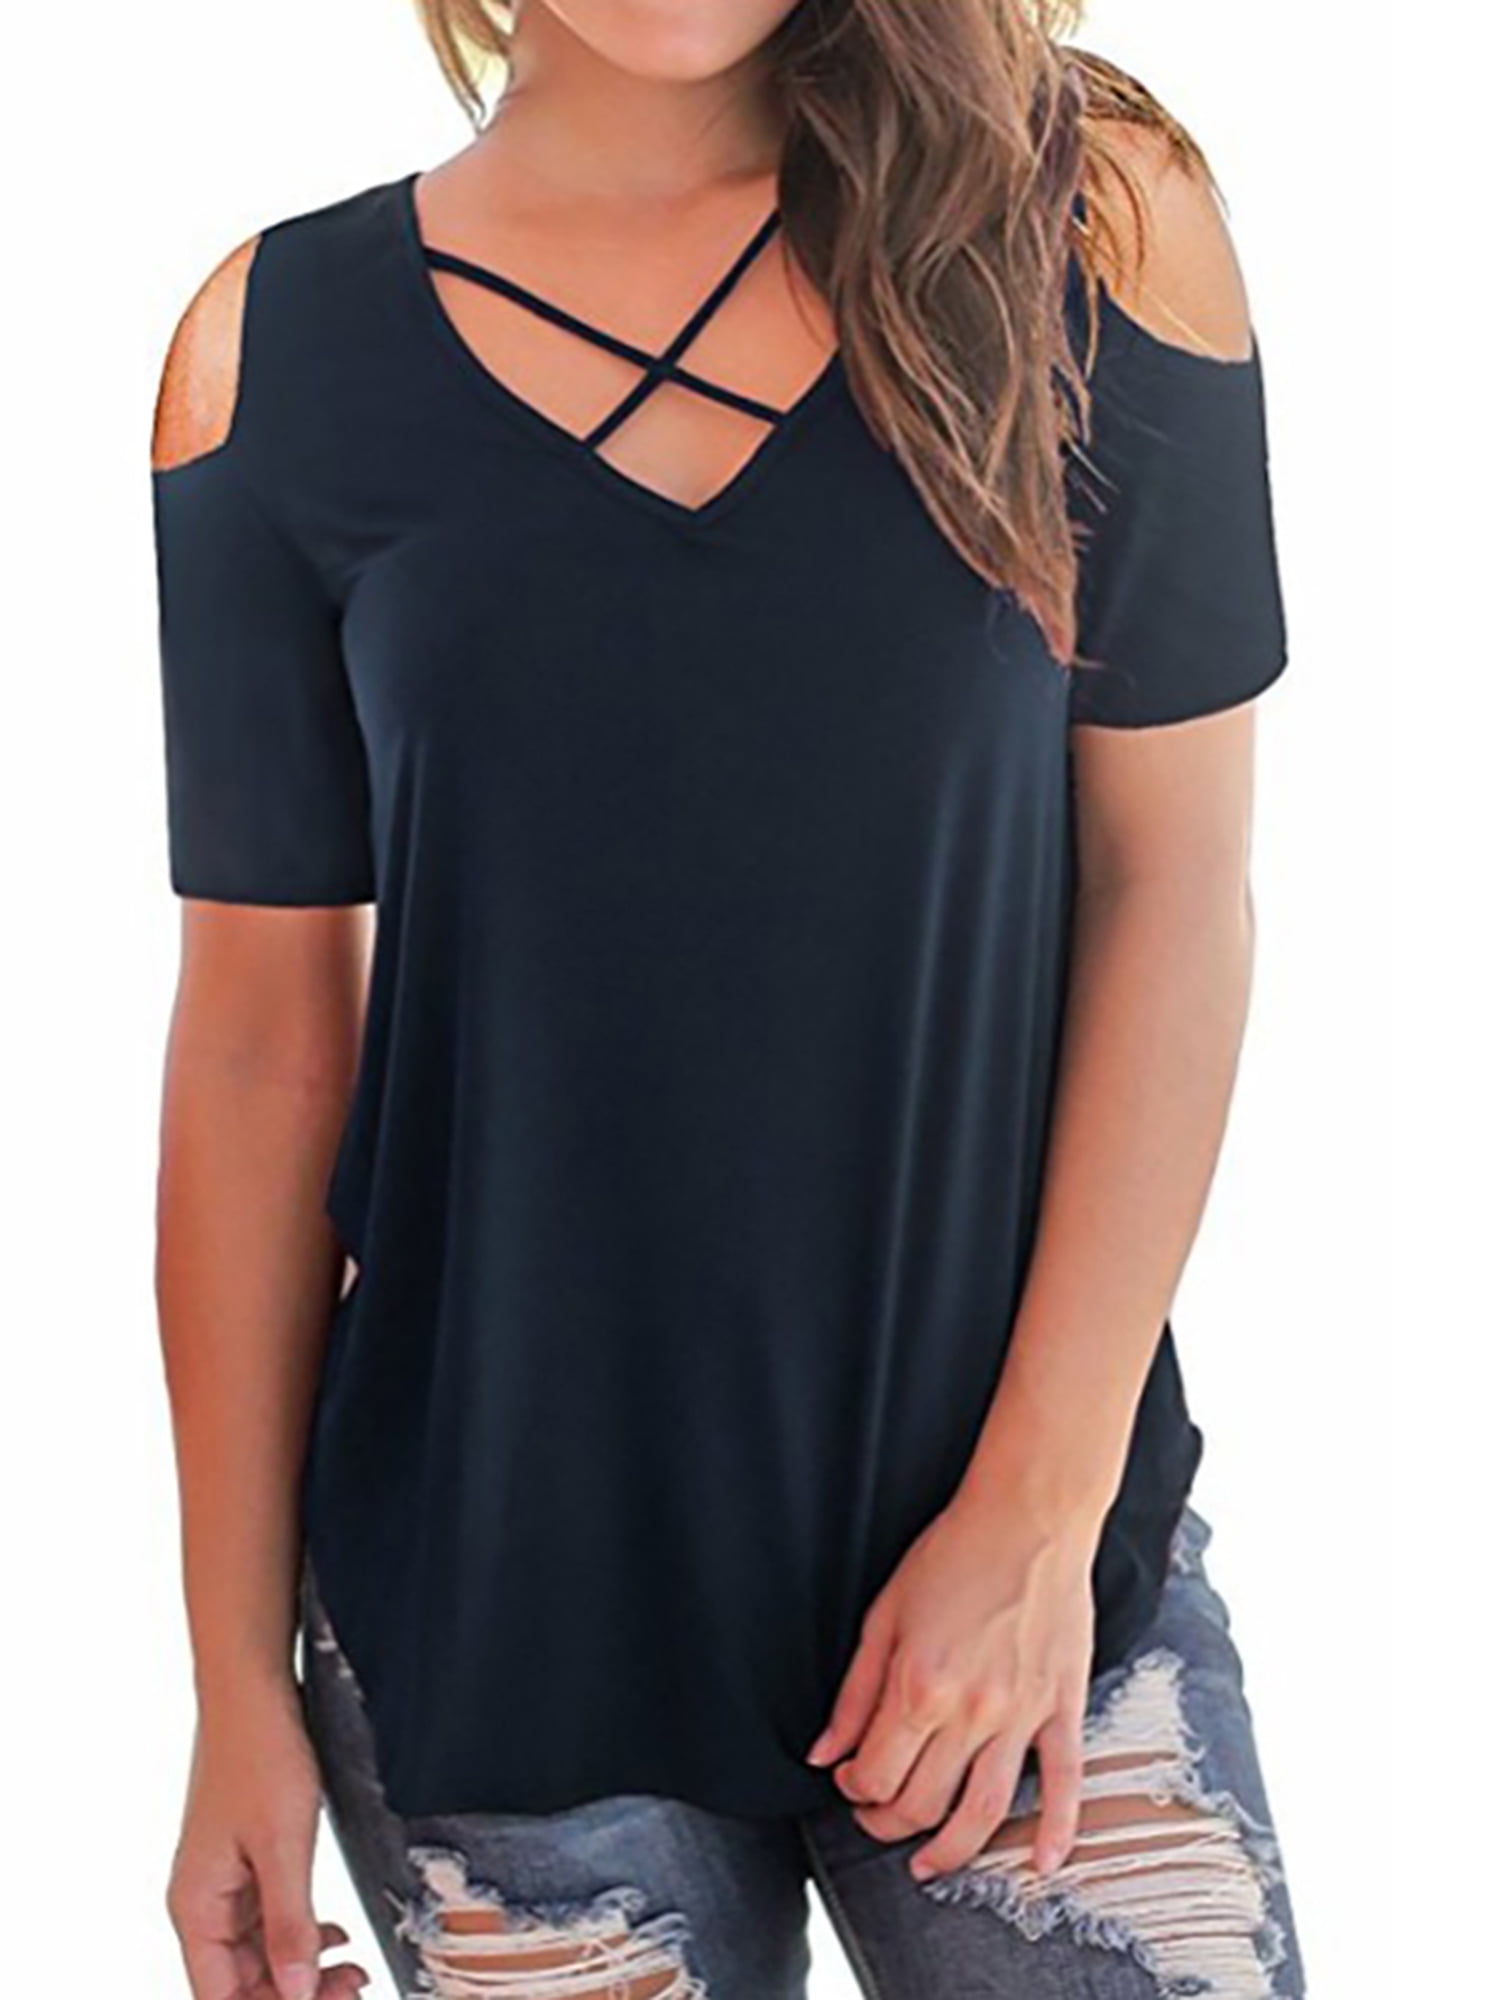 Women Casual Cuffed Short Sleeve T-Shirt Crew Neck Letter Print Blouse Knotted Front Loose Basic Tee Tunic Tops